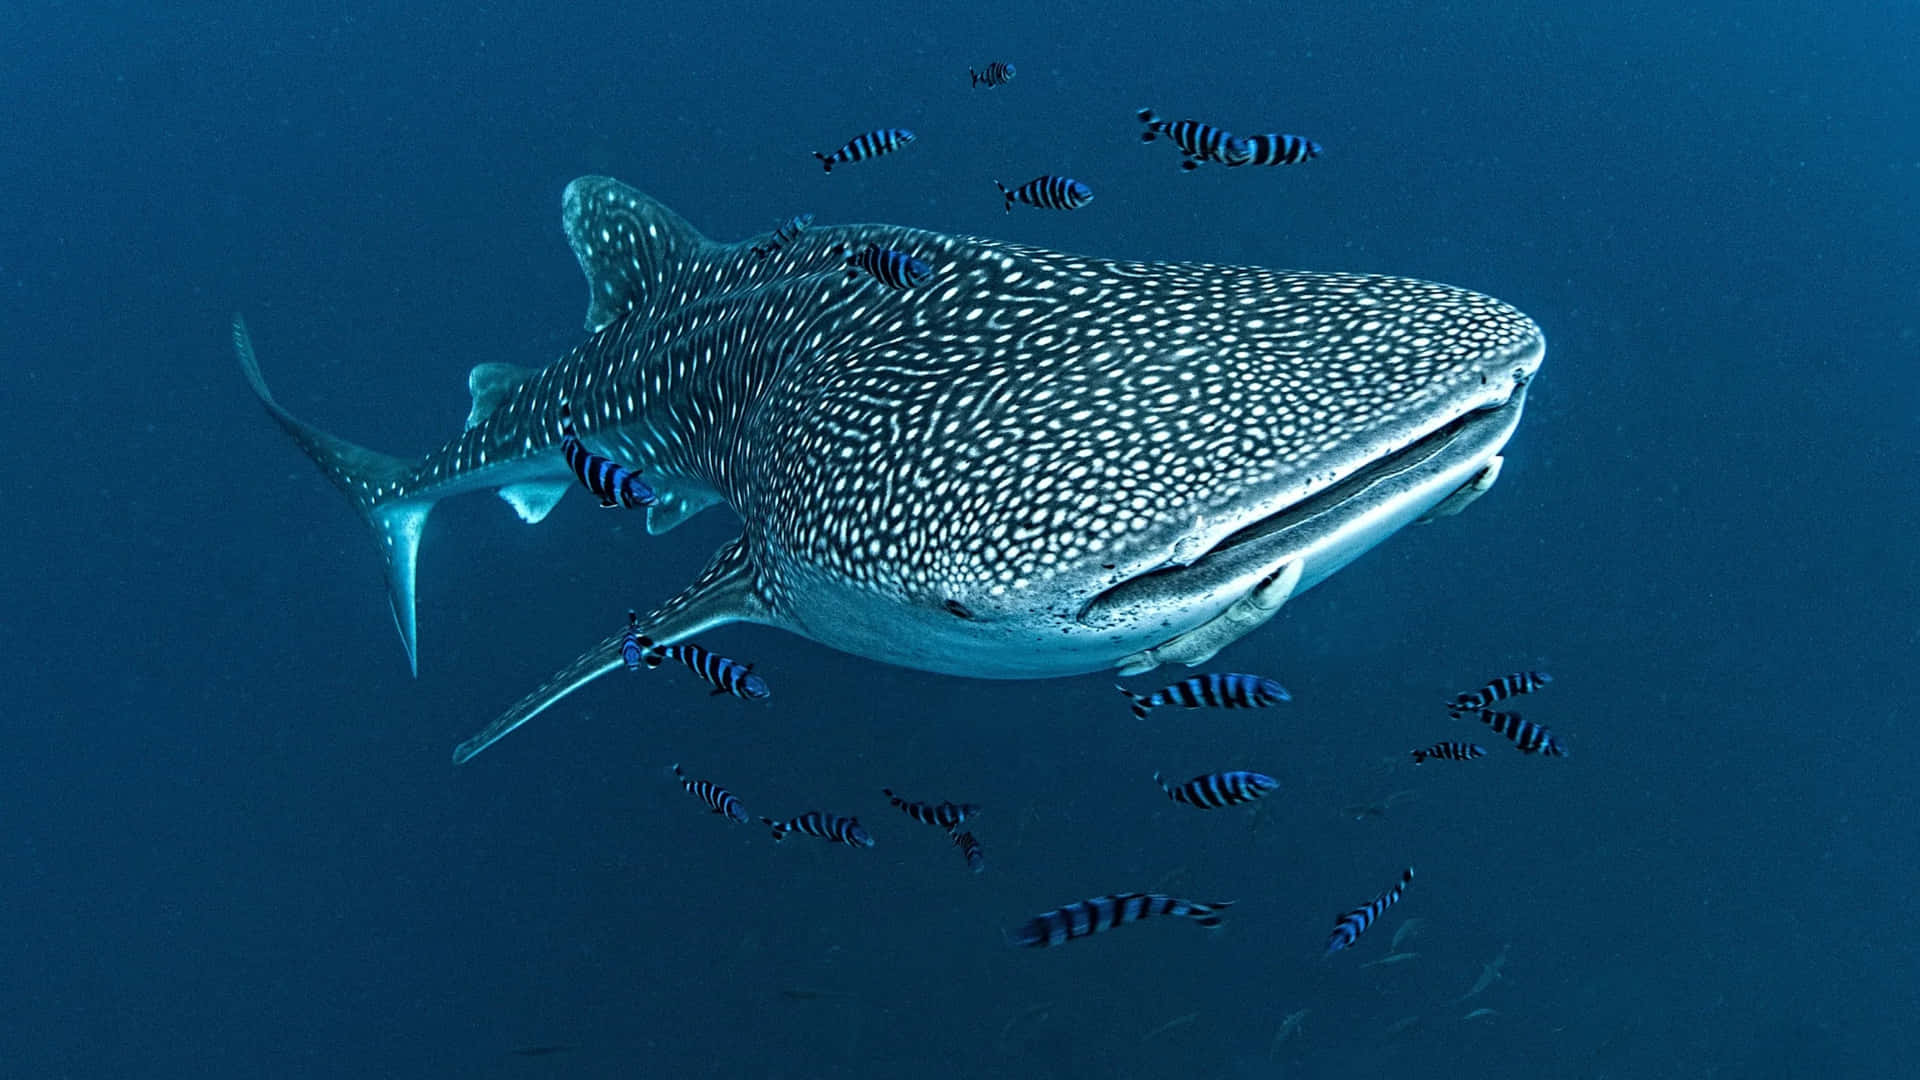 A majestic whale shark in its natural habitat